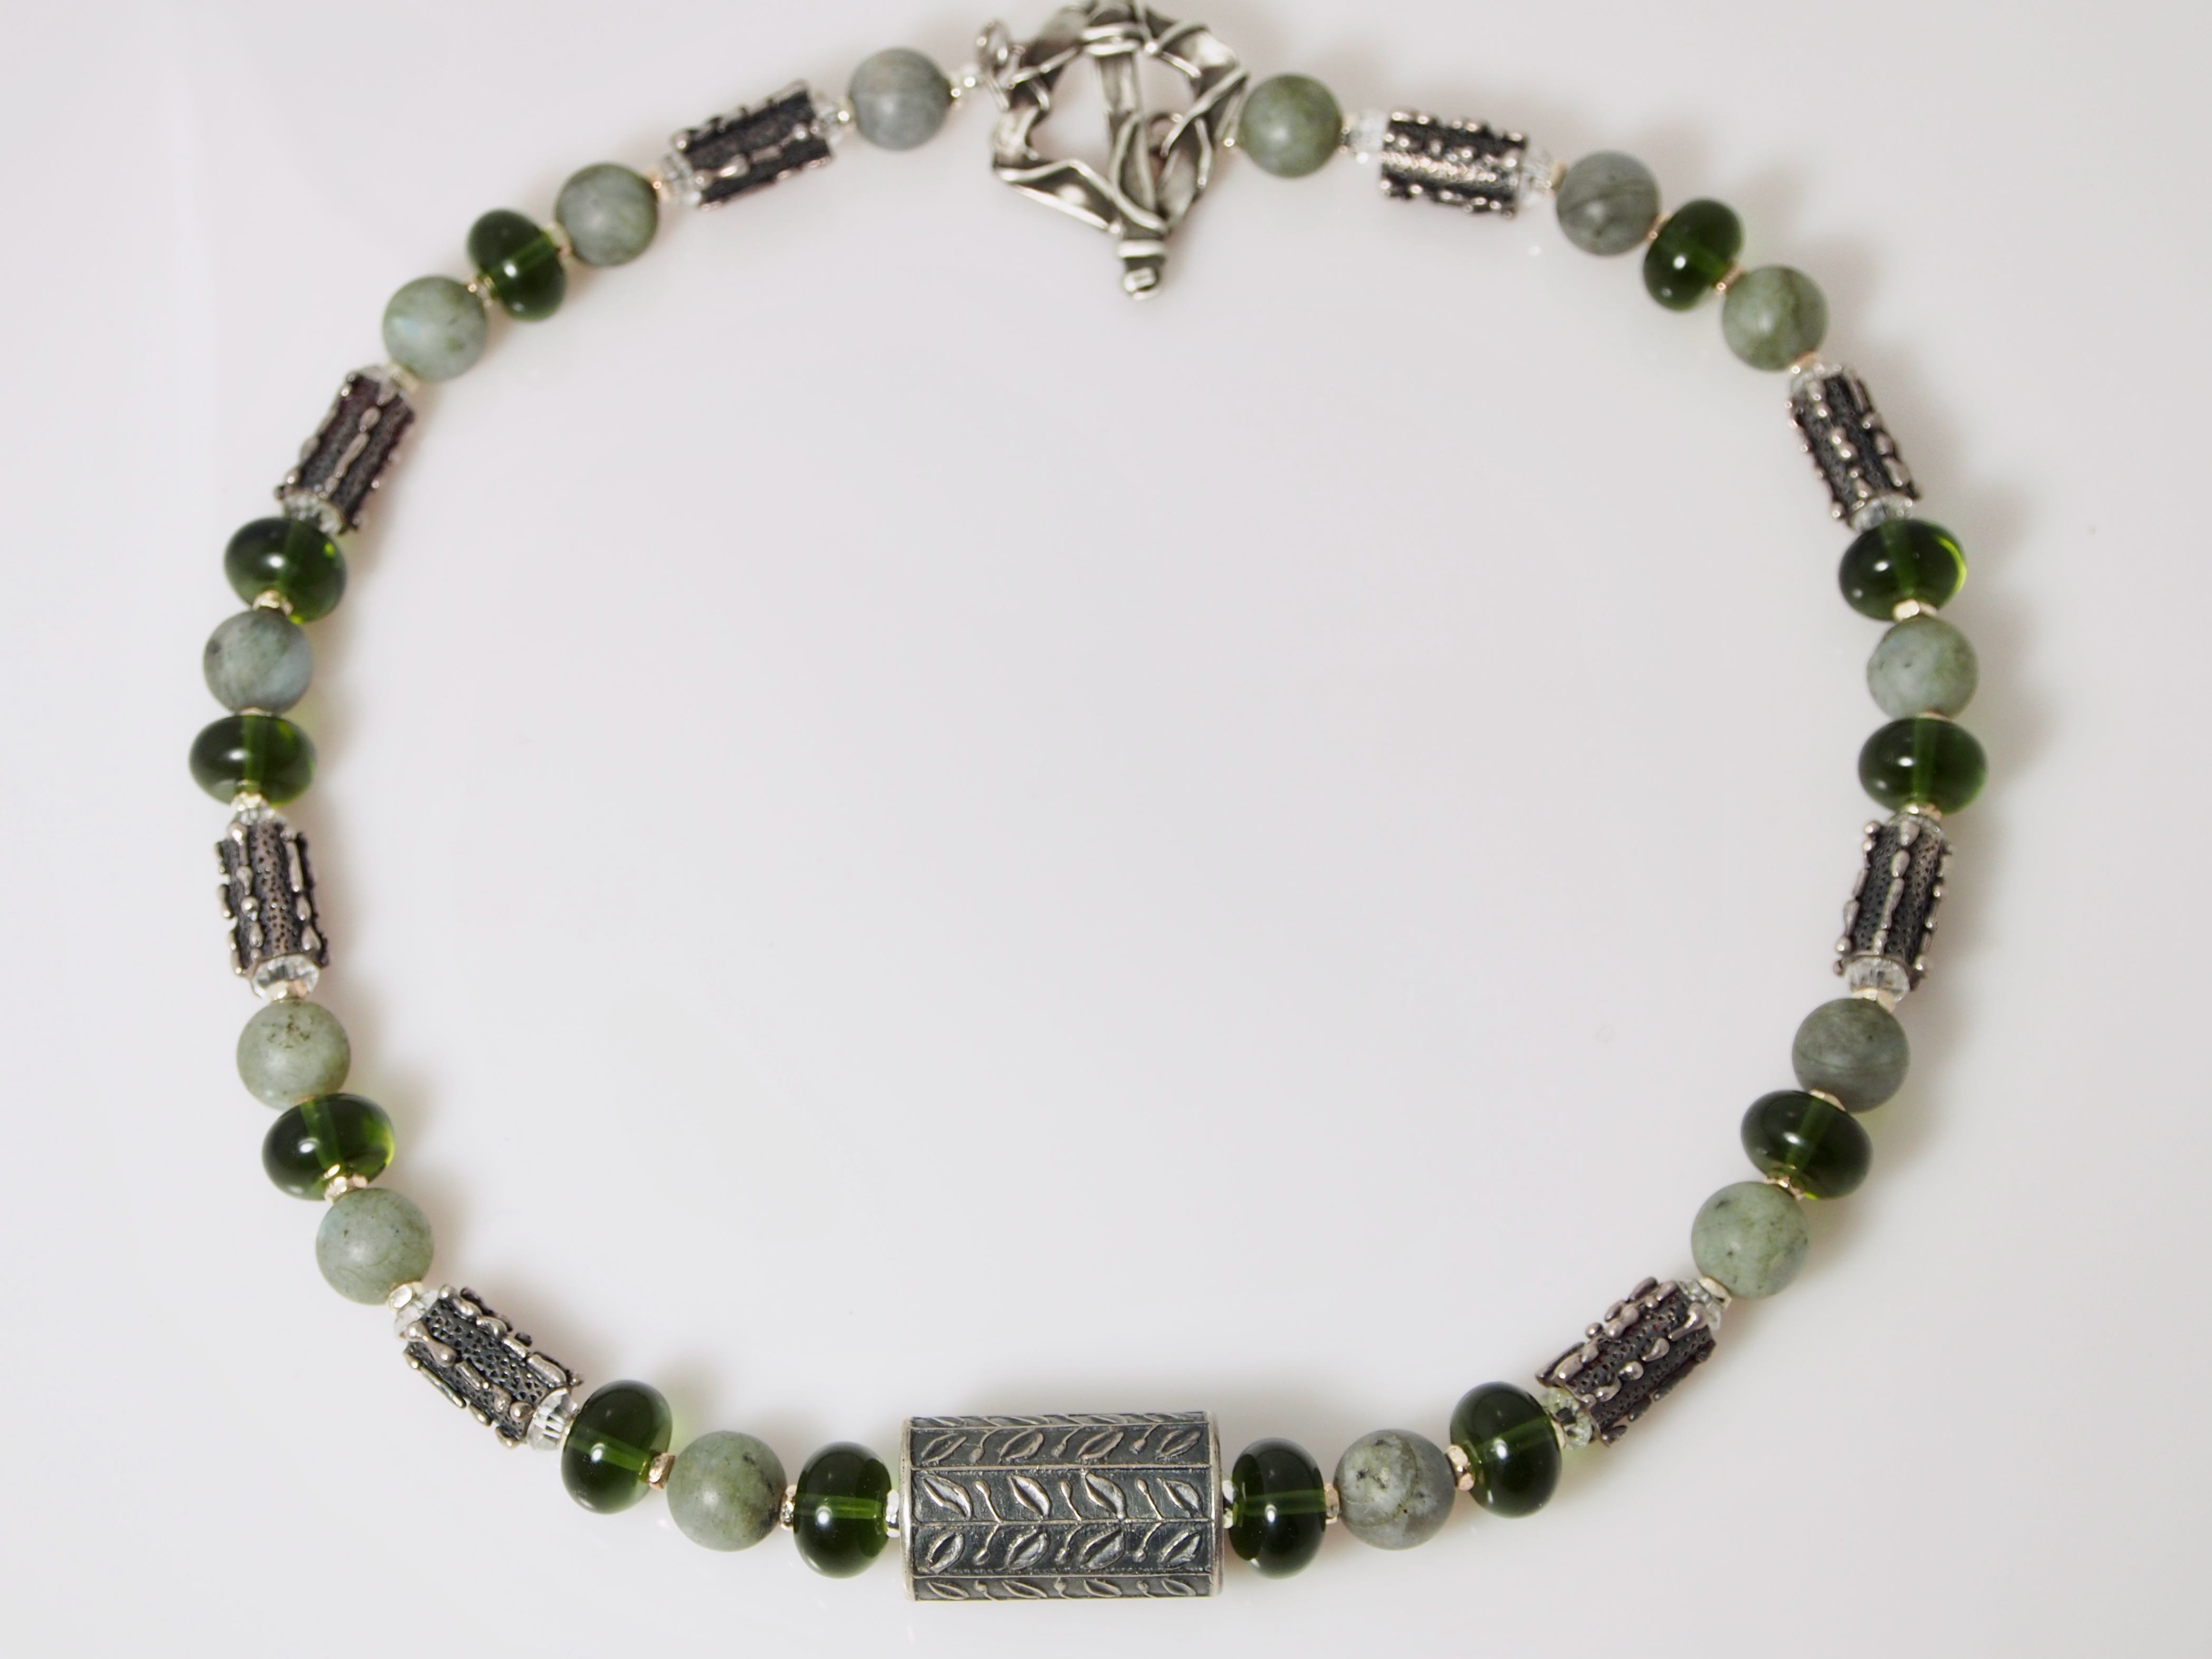 Nature's Calling Necklace - Sterling Silver Anne Choi Leaf Bead/Silver Bark Beads/Matte Labradorite and Rare Bottle Green Moldavite From Czech Republic